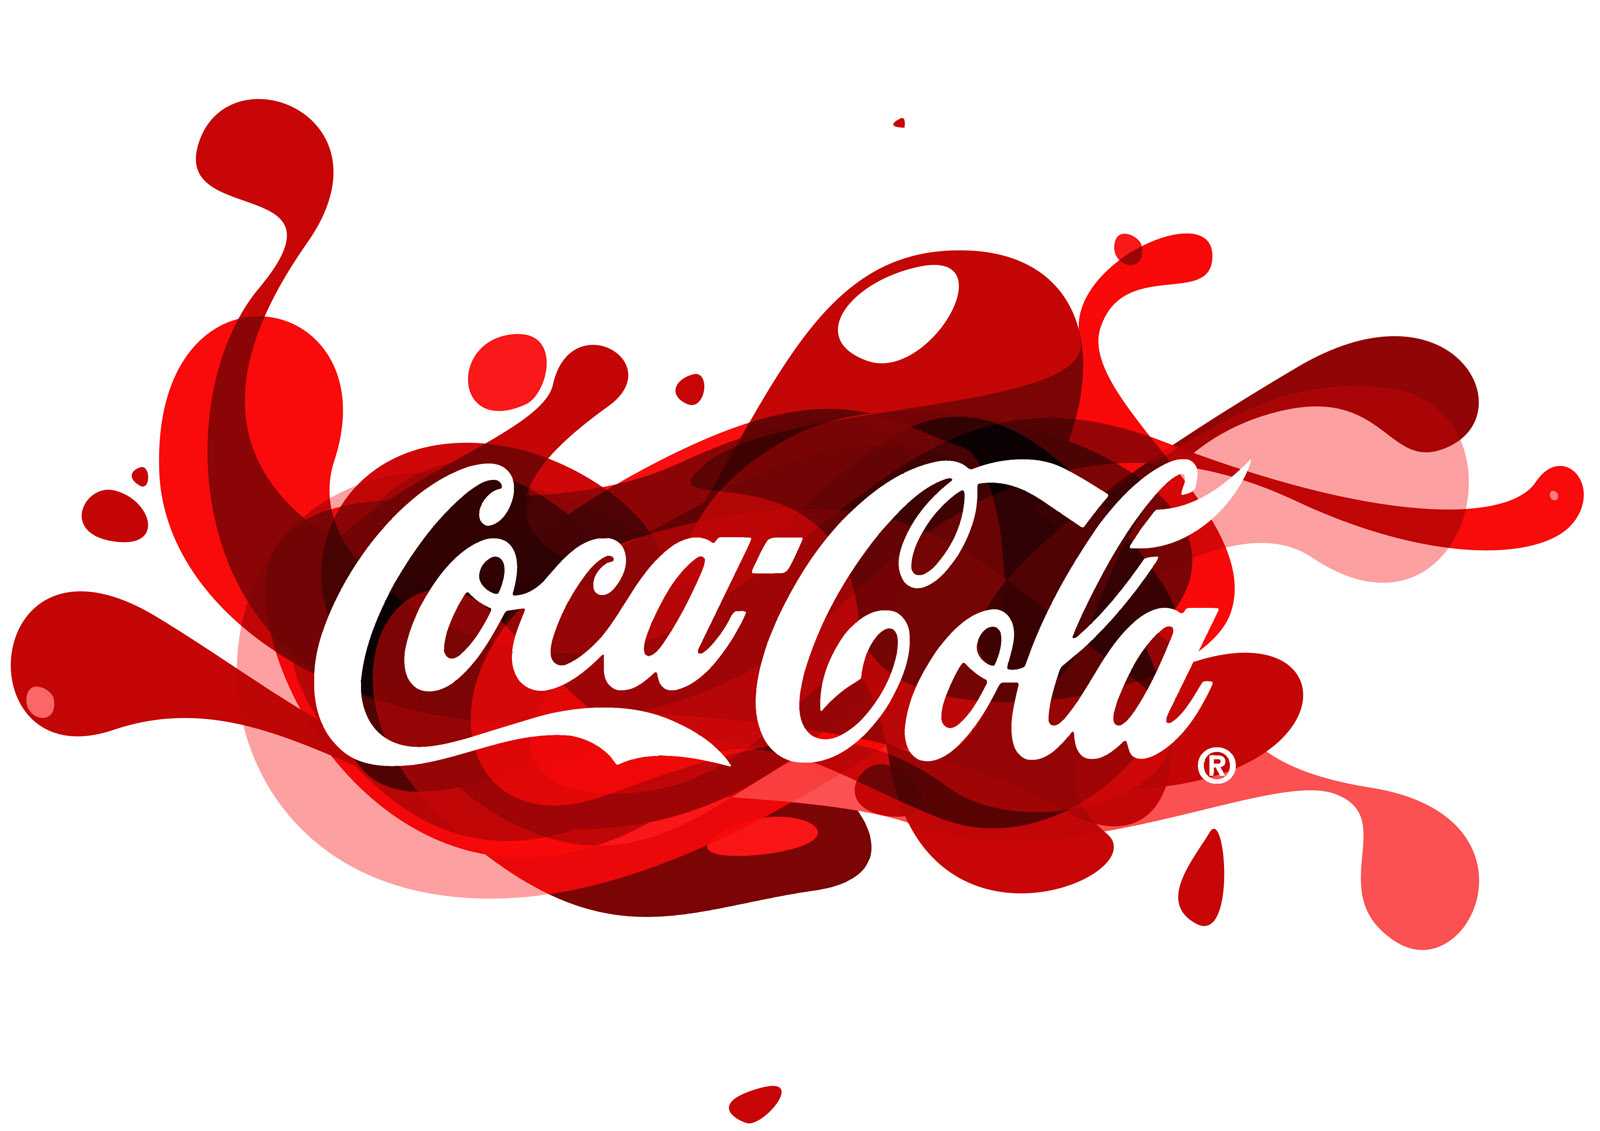 Coca Cola Free Ppt Backgrounds For Your Powerpoint Templates With Coca Cola Powerpoint Template